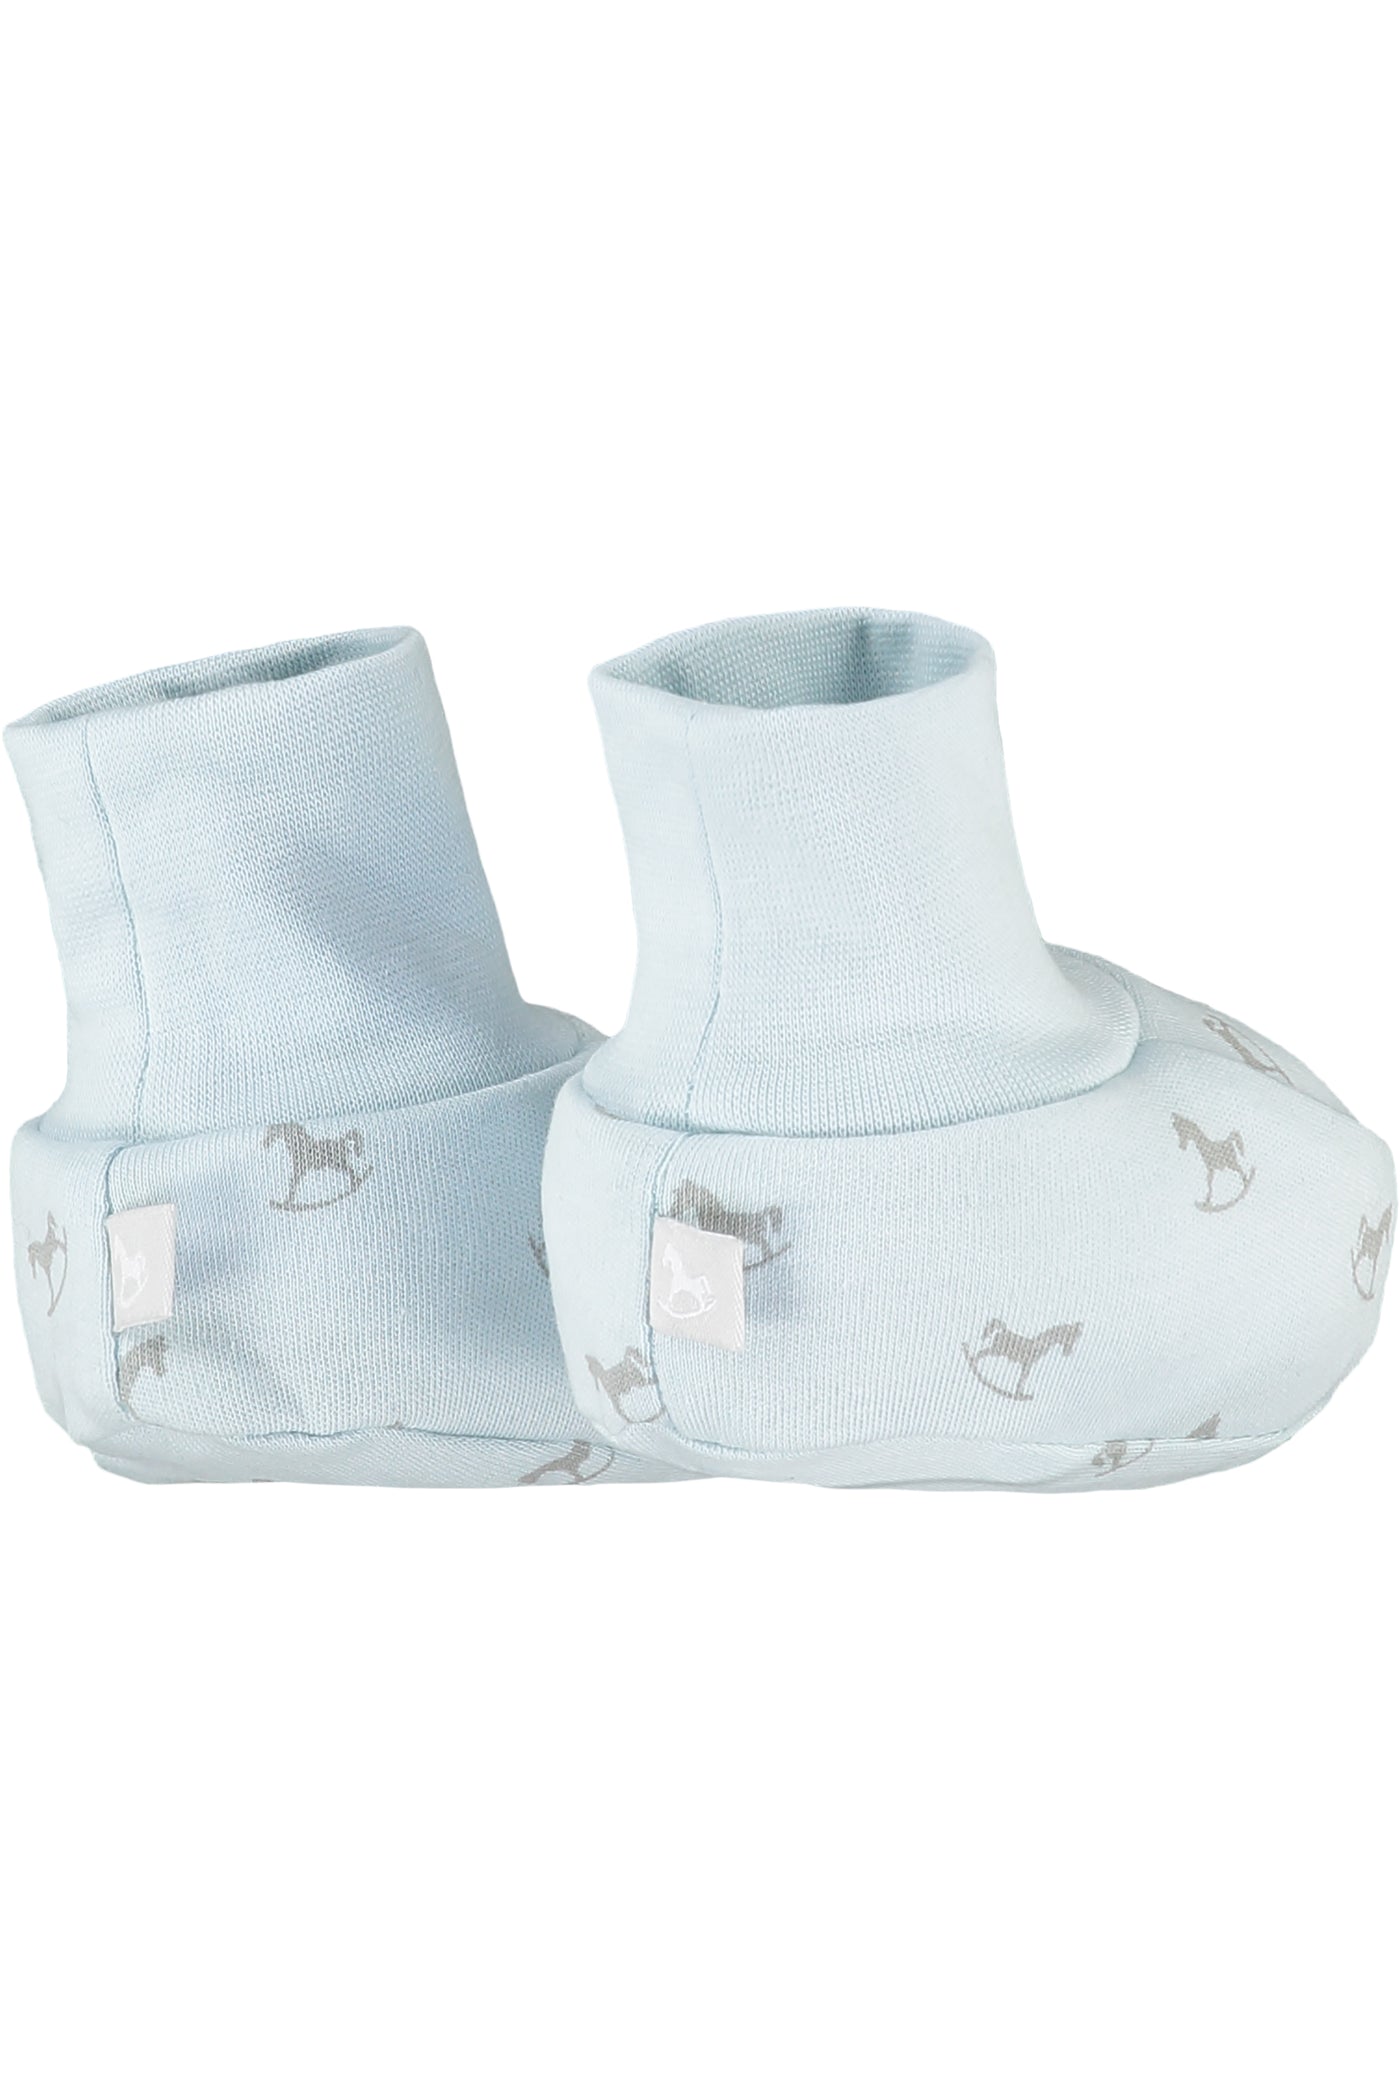 2 Pack Soft Jersey Baby Booties - blue